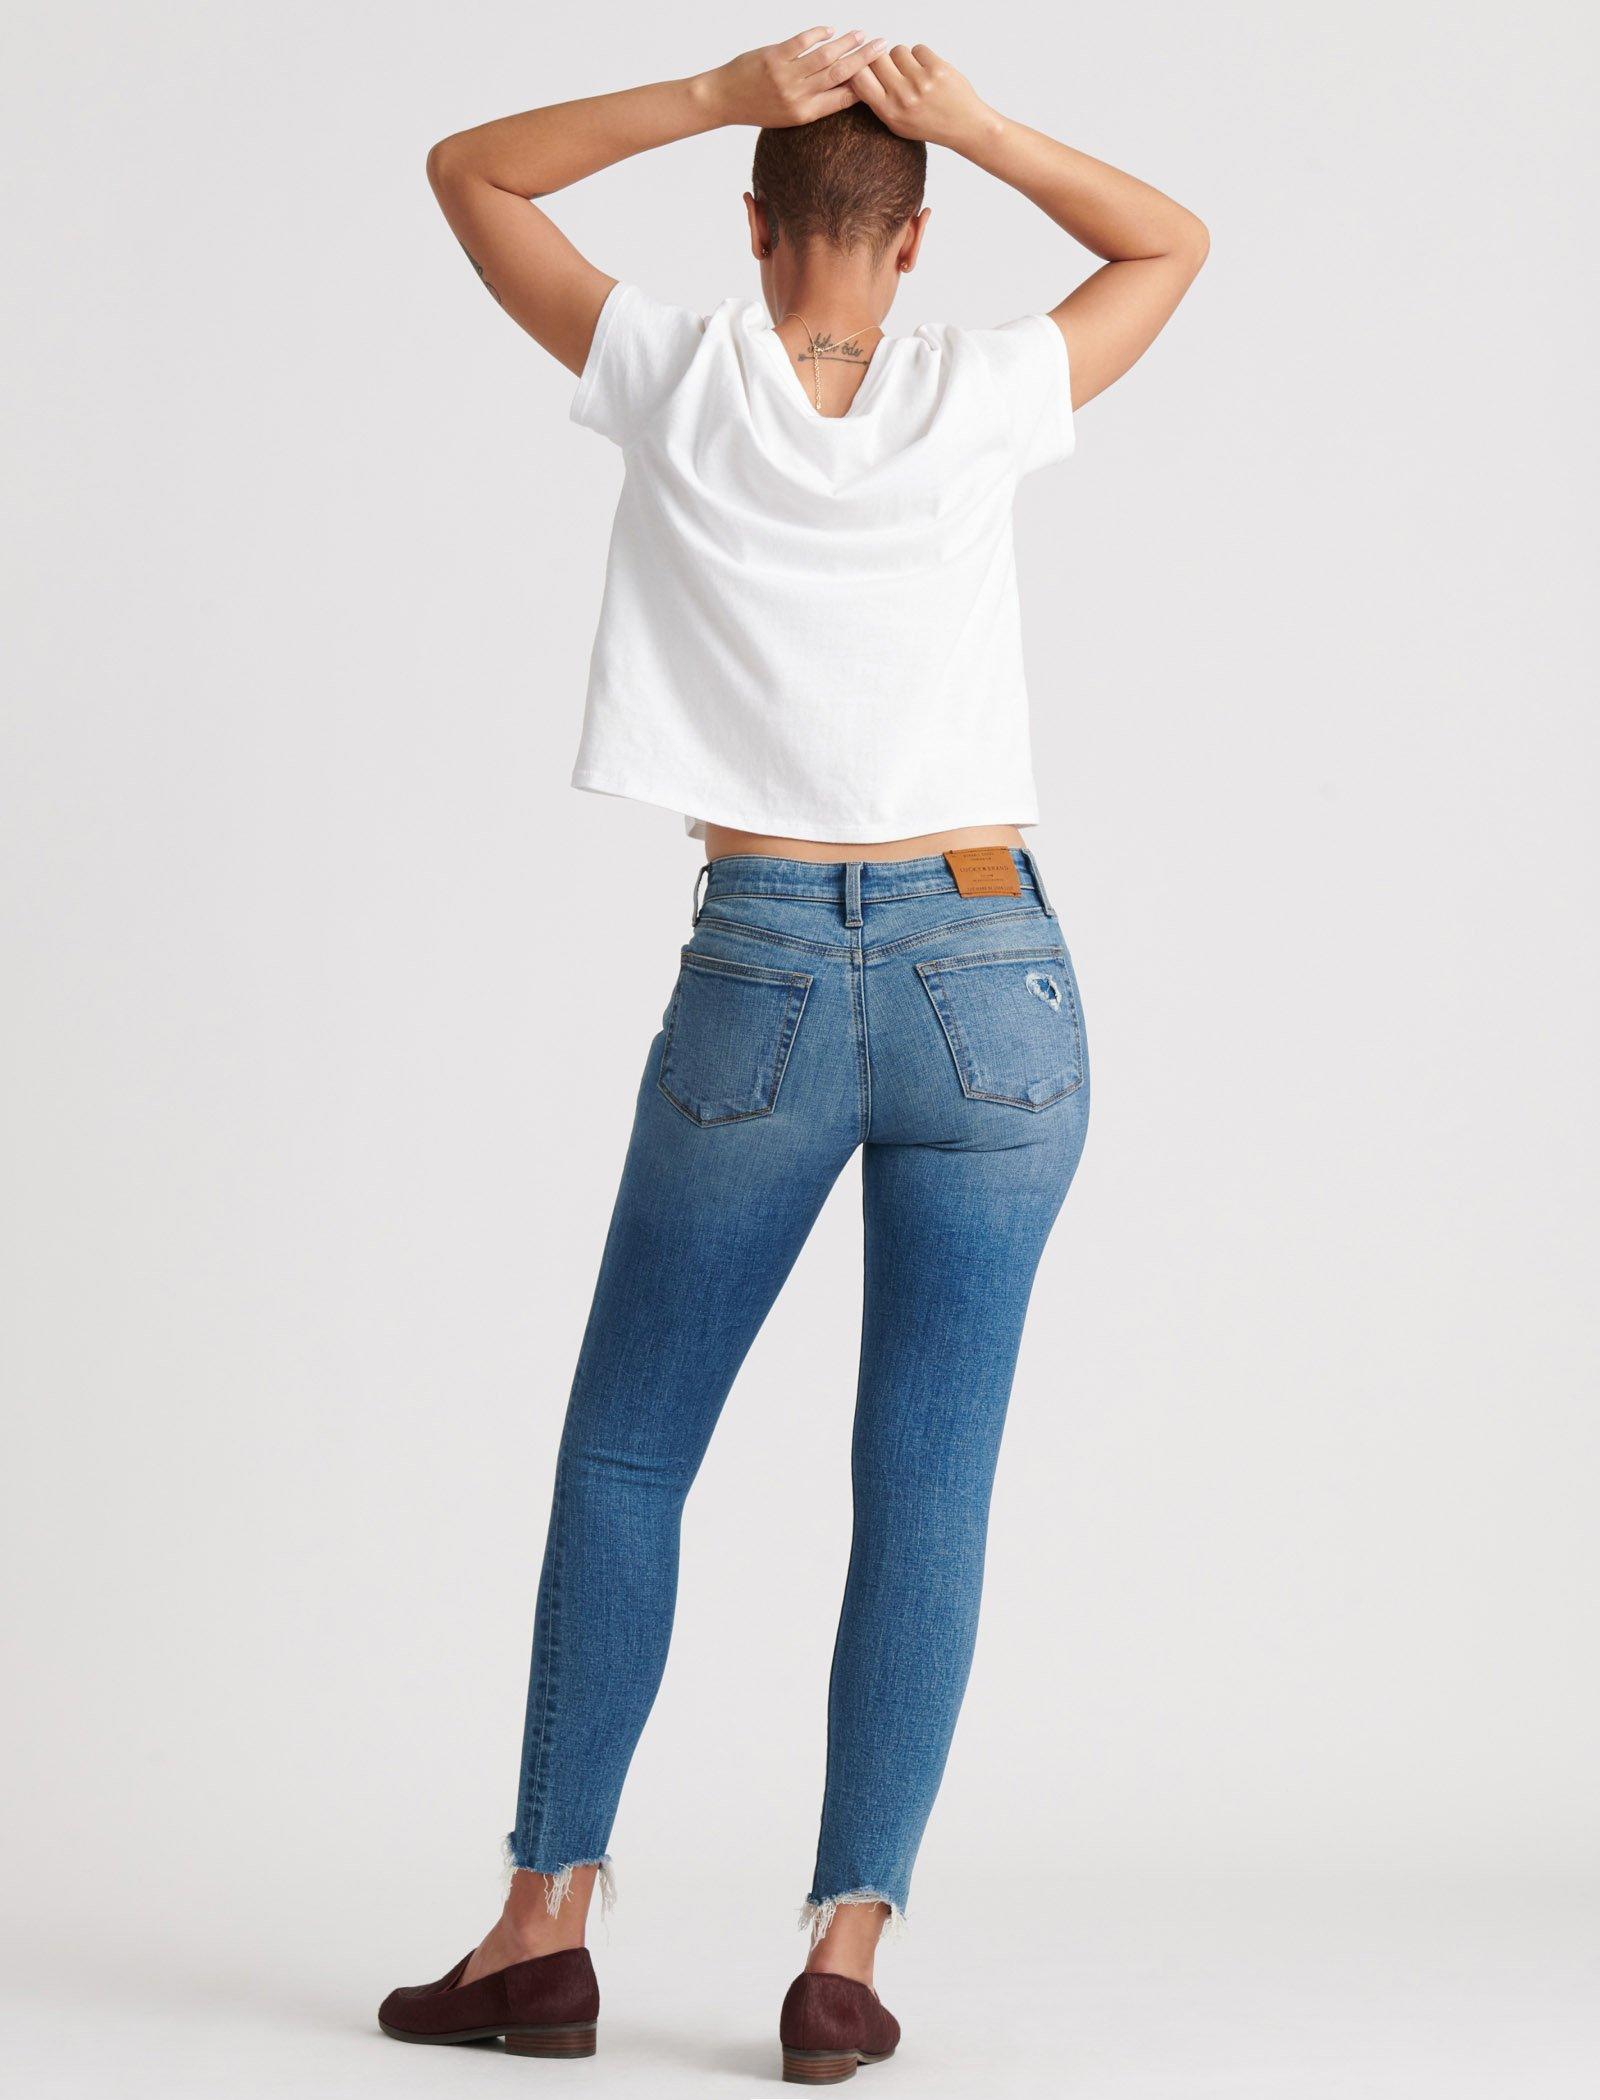 lucky brand ava ripped skinny jeans